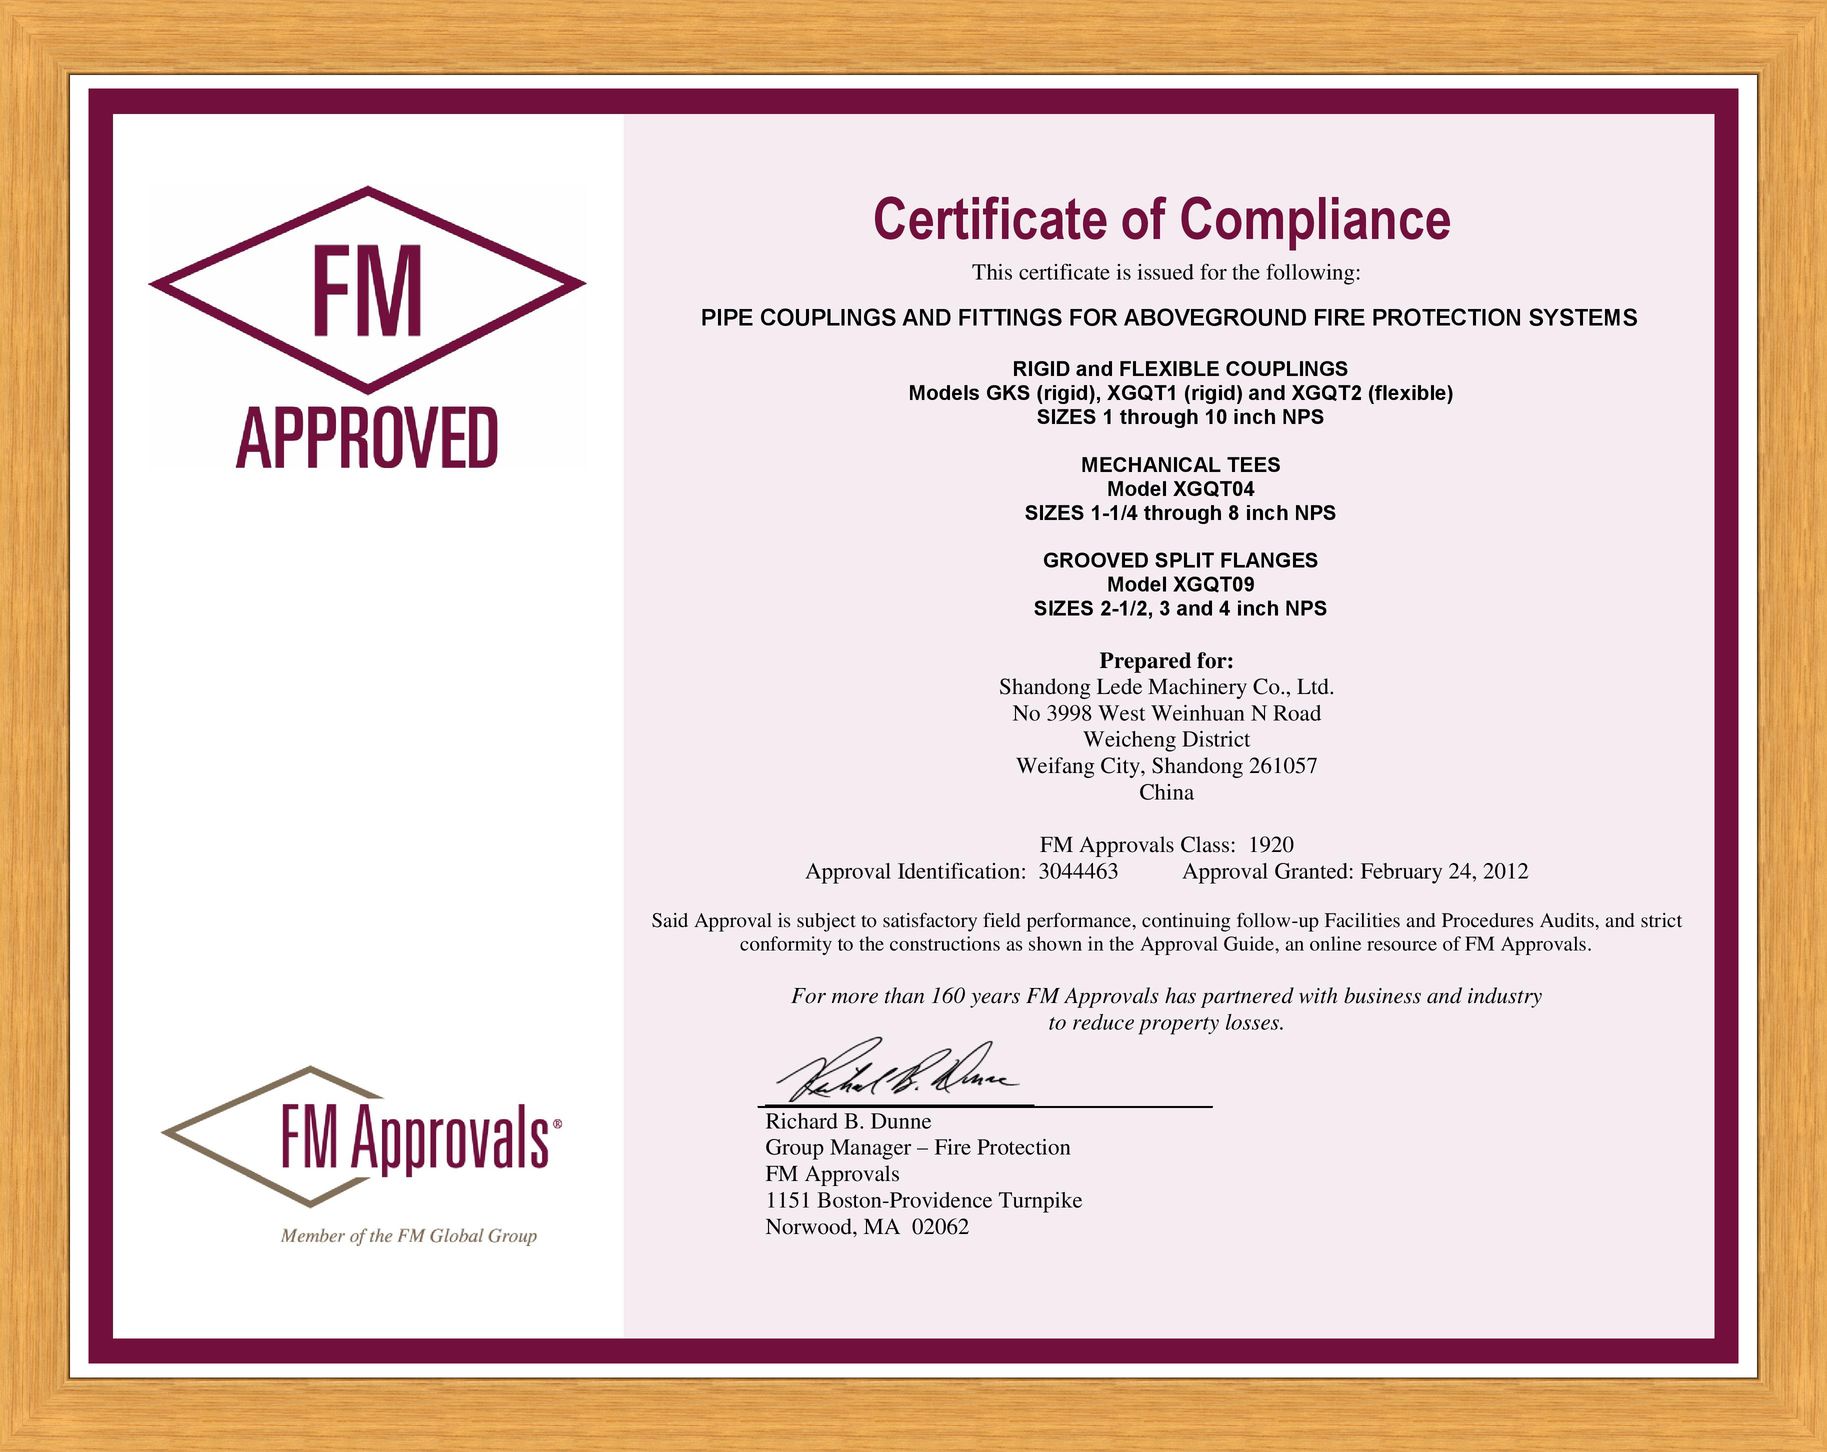 FM Approved sertificate (Couplings, Mechanical tees, Flanges), 2012